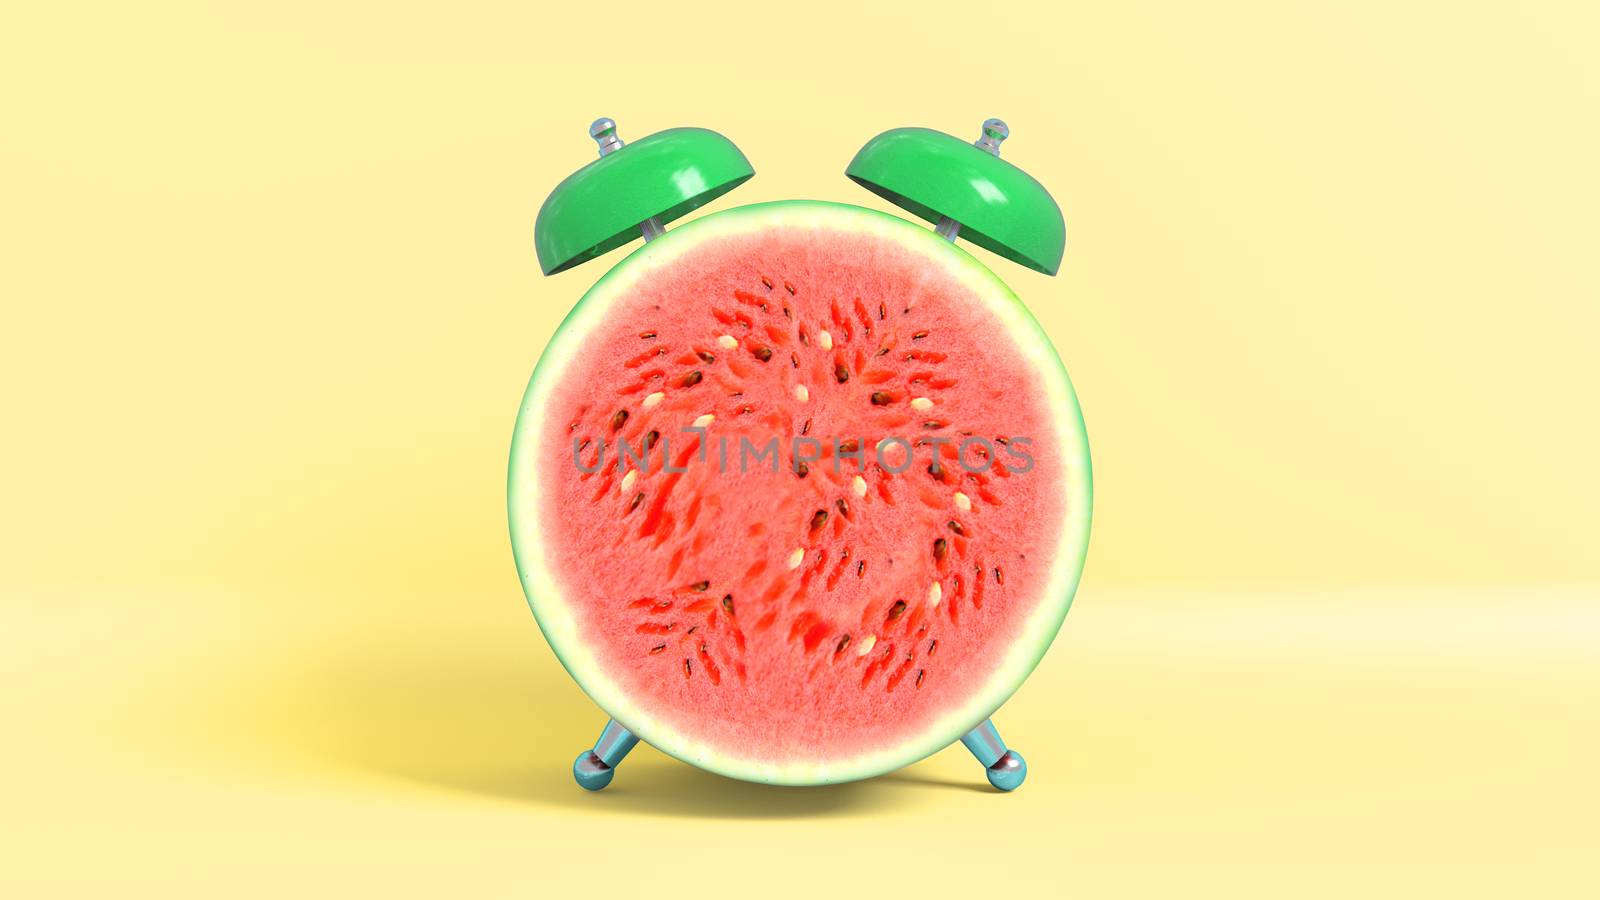 Wake up vintage morning shaped watermelon. Concept illustrating that it is time to take vitamins. 3D rendering.